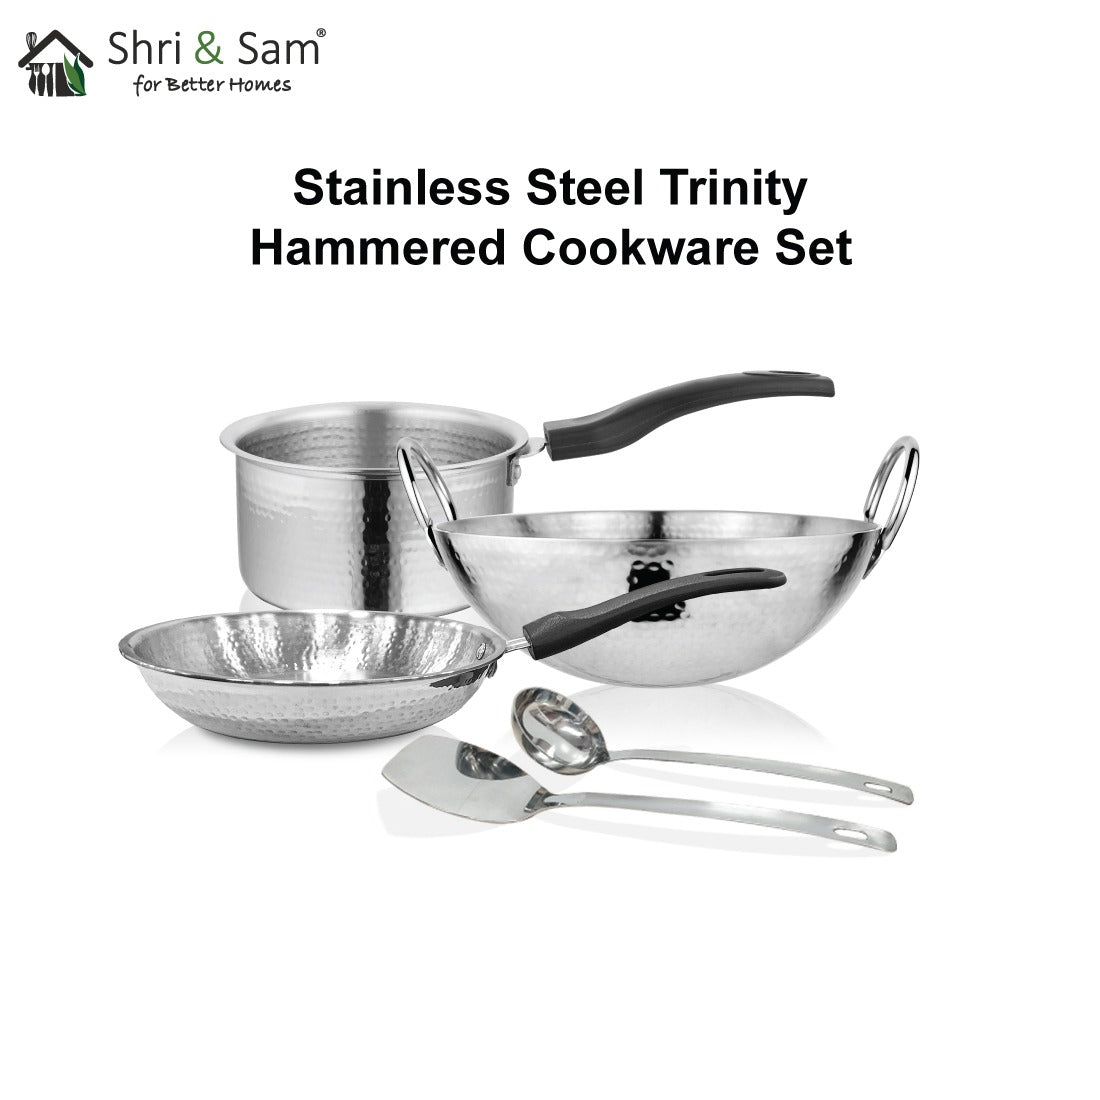 Stainless Steel 5 PCS Hammered Cookware Set Trinity